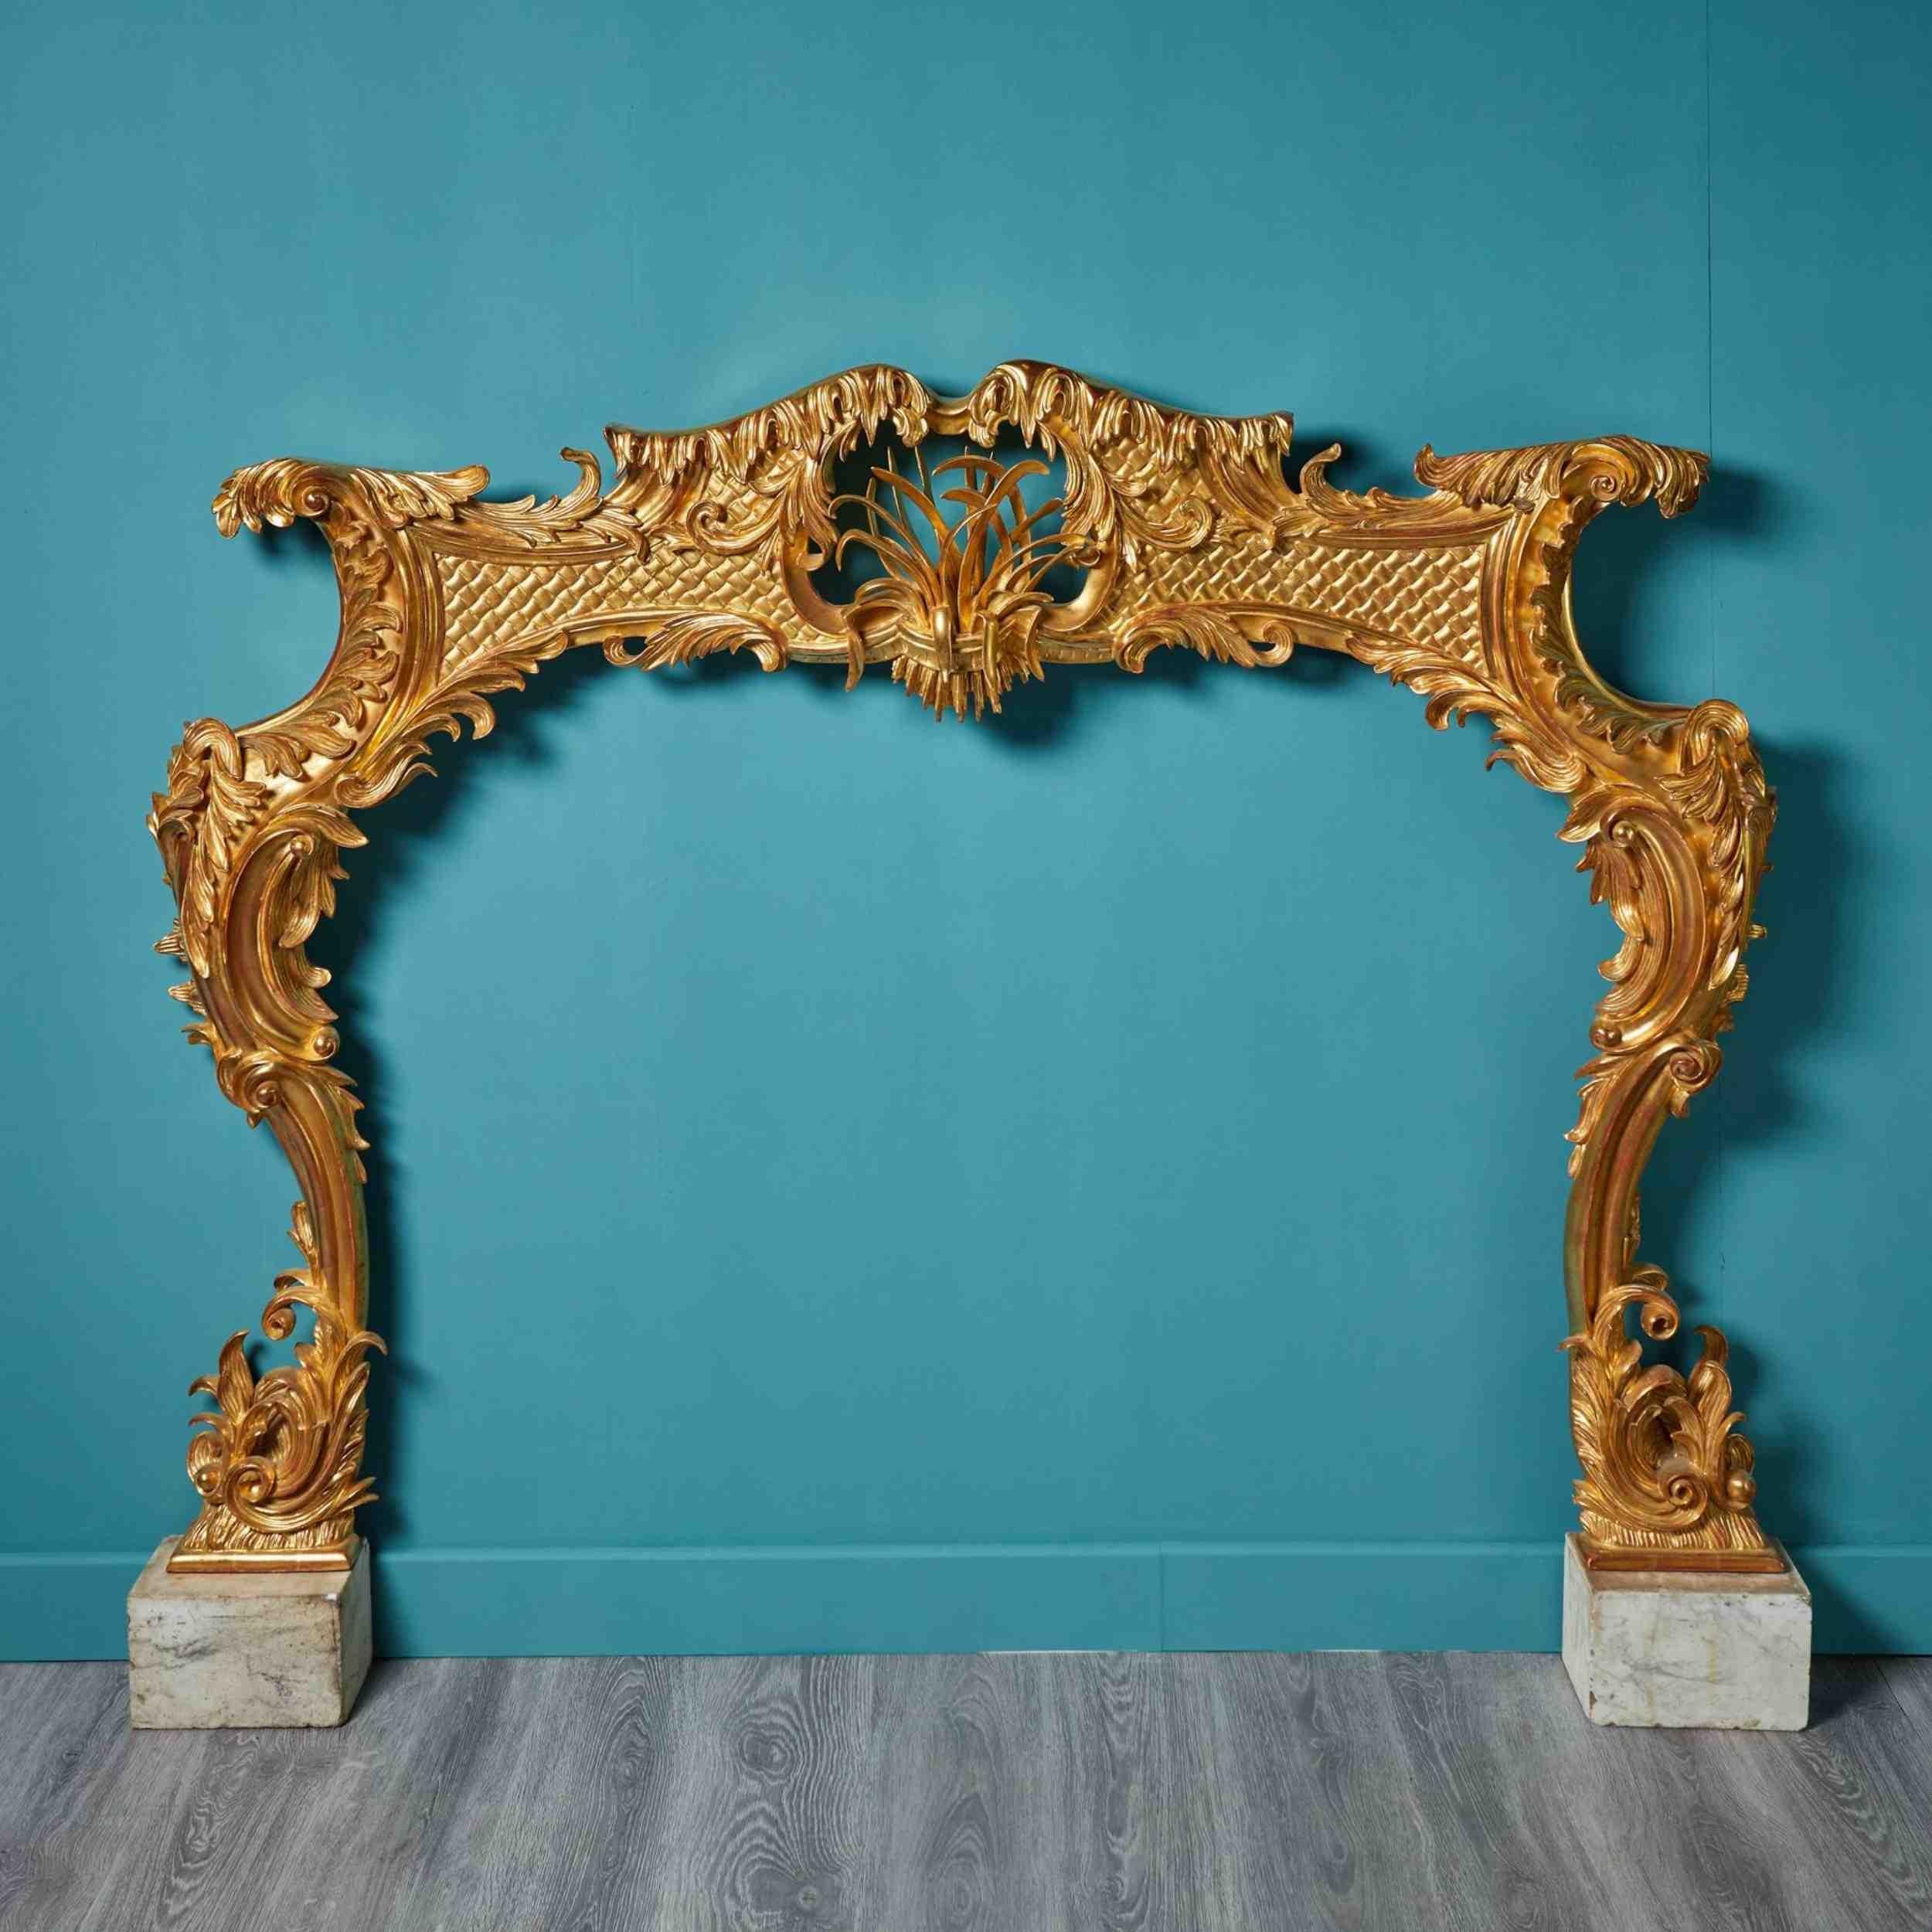 18th Century Rococo Style Giltwood Fireplace. A striking and imposing chimney piece, hand carved and gilded.
 
Additional Dimensions
For an opening height of approx. 117 cm
For an opening width 149 cm
Across the foot blocks 186 cm.